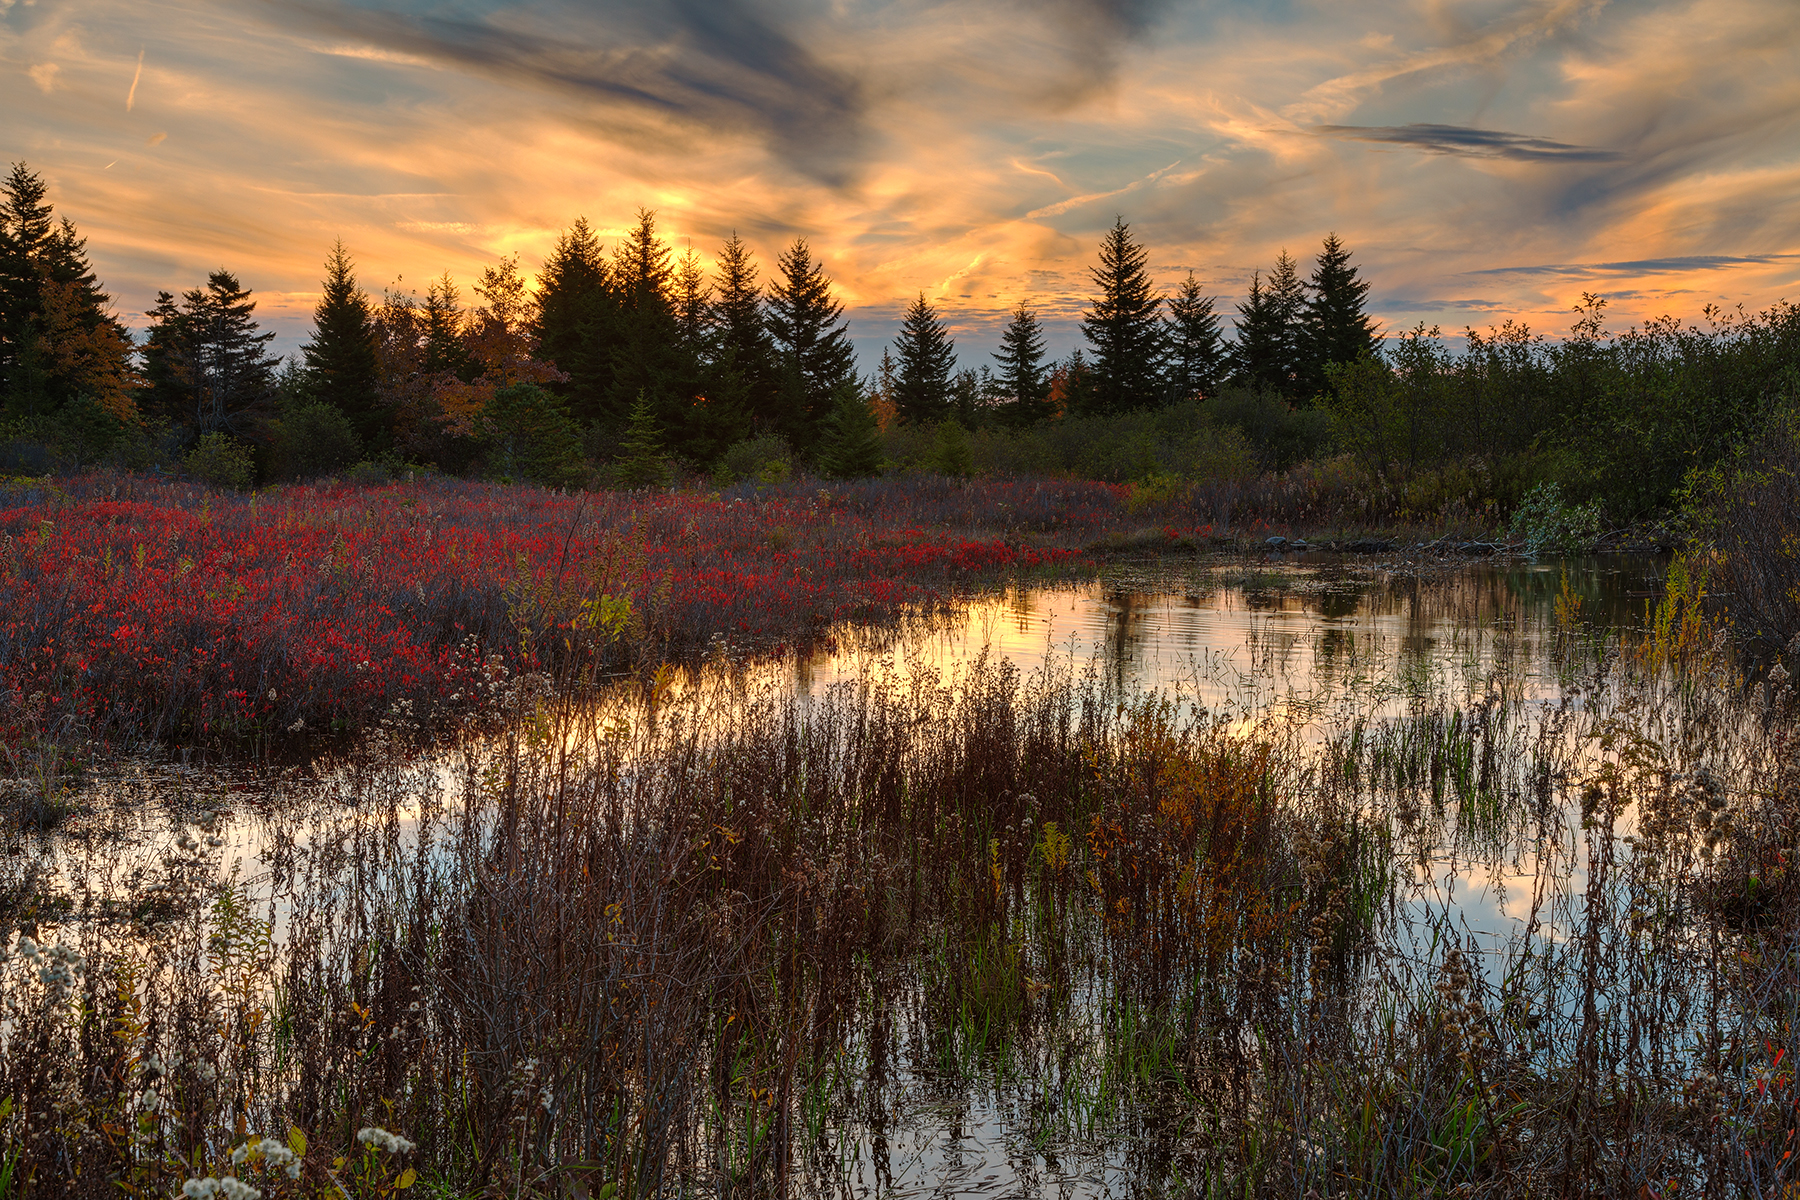 Autumn dolly sods sunset - hdr photo